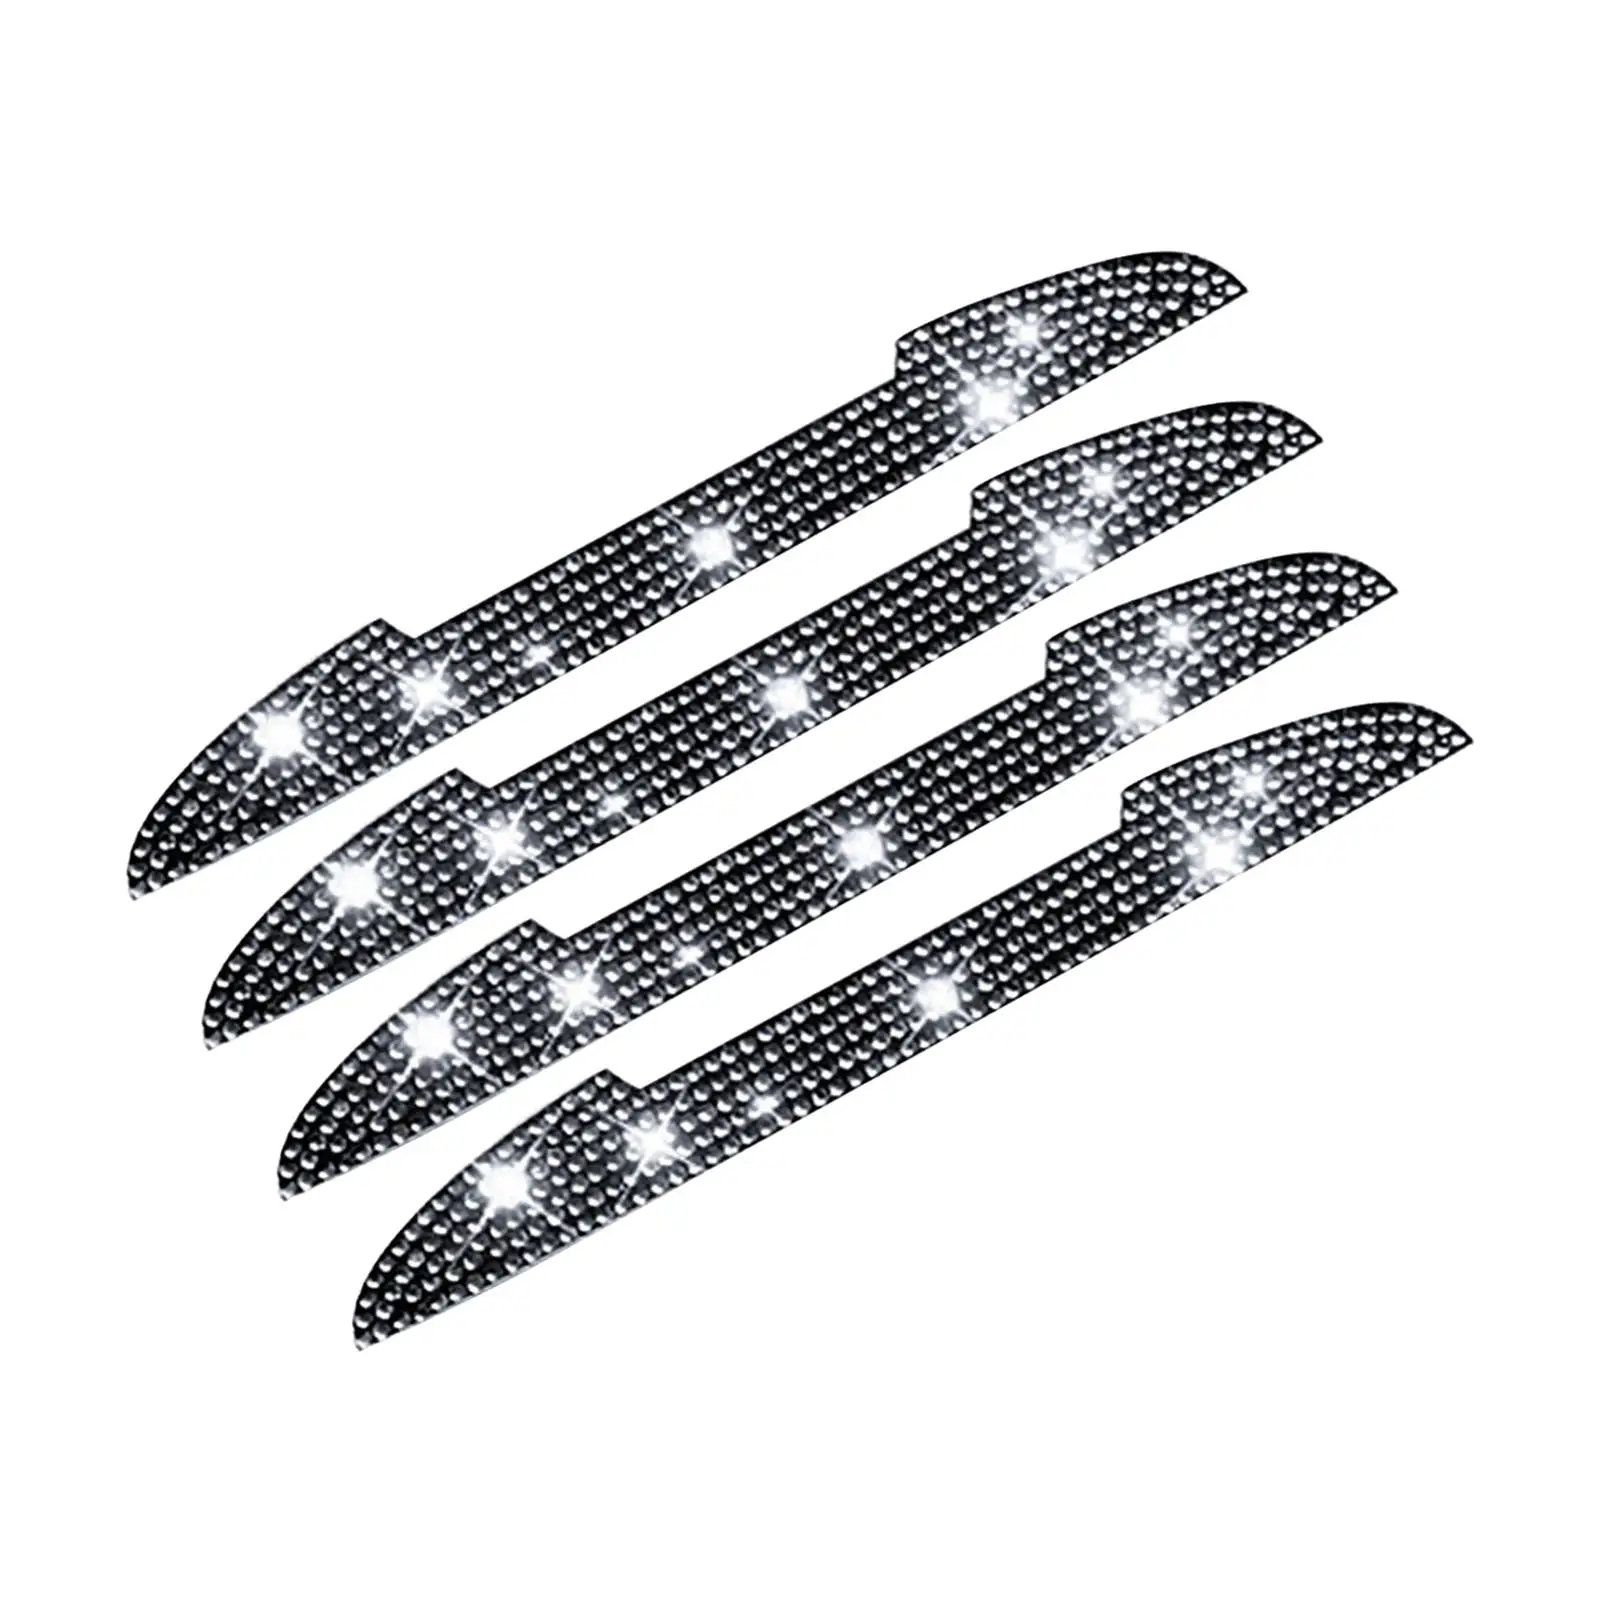 4Pcs Rhinestones Car Door Side Edge Protection Guards Self Adhesive Anti Collision Strips for Rear View Mirror Cover